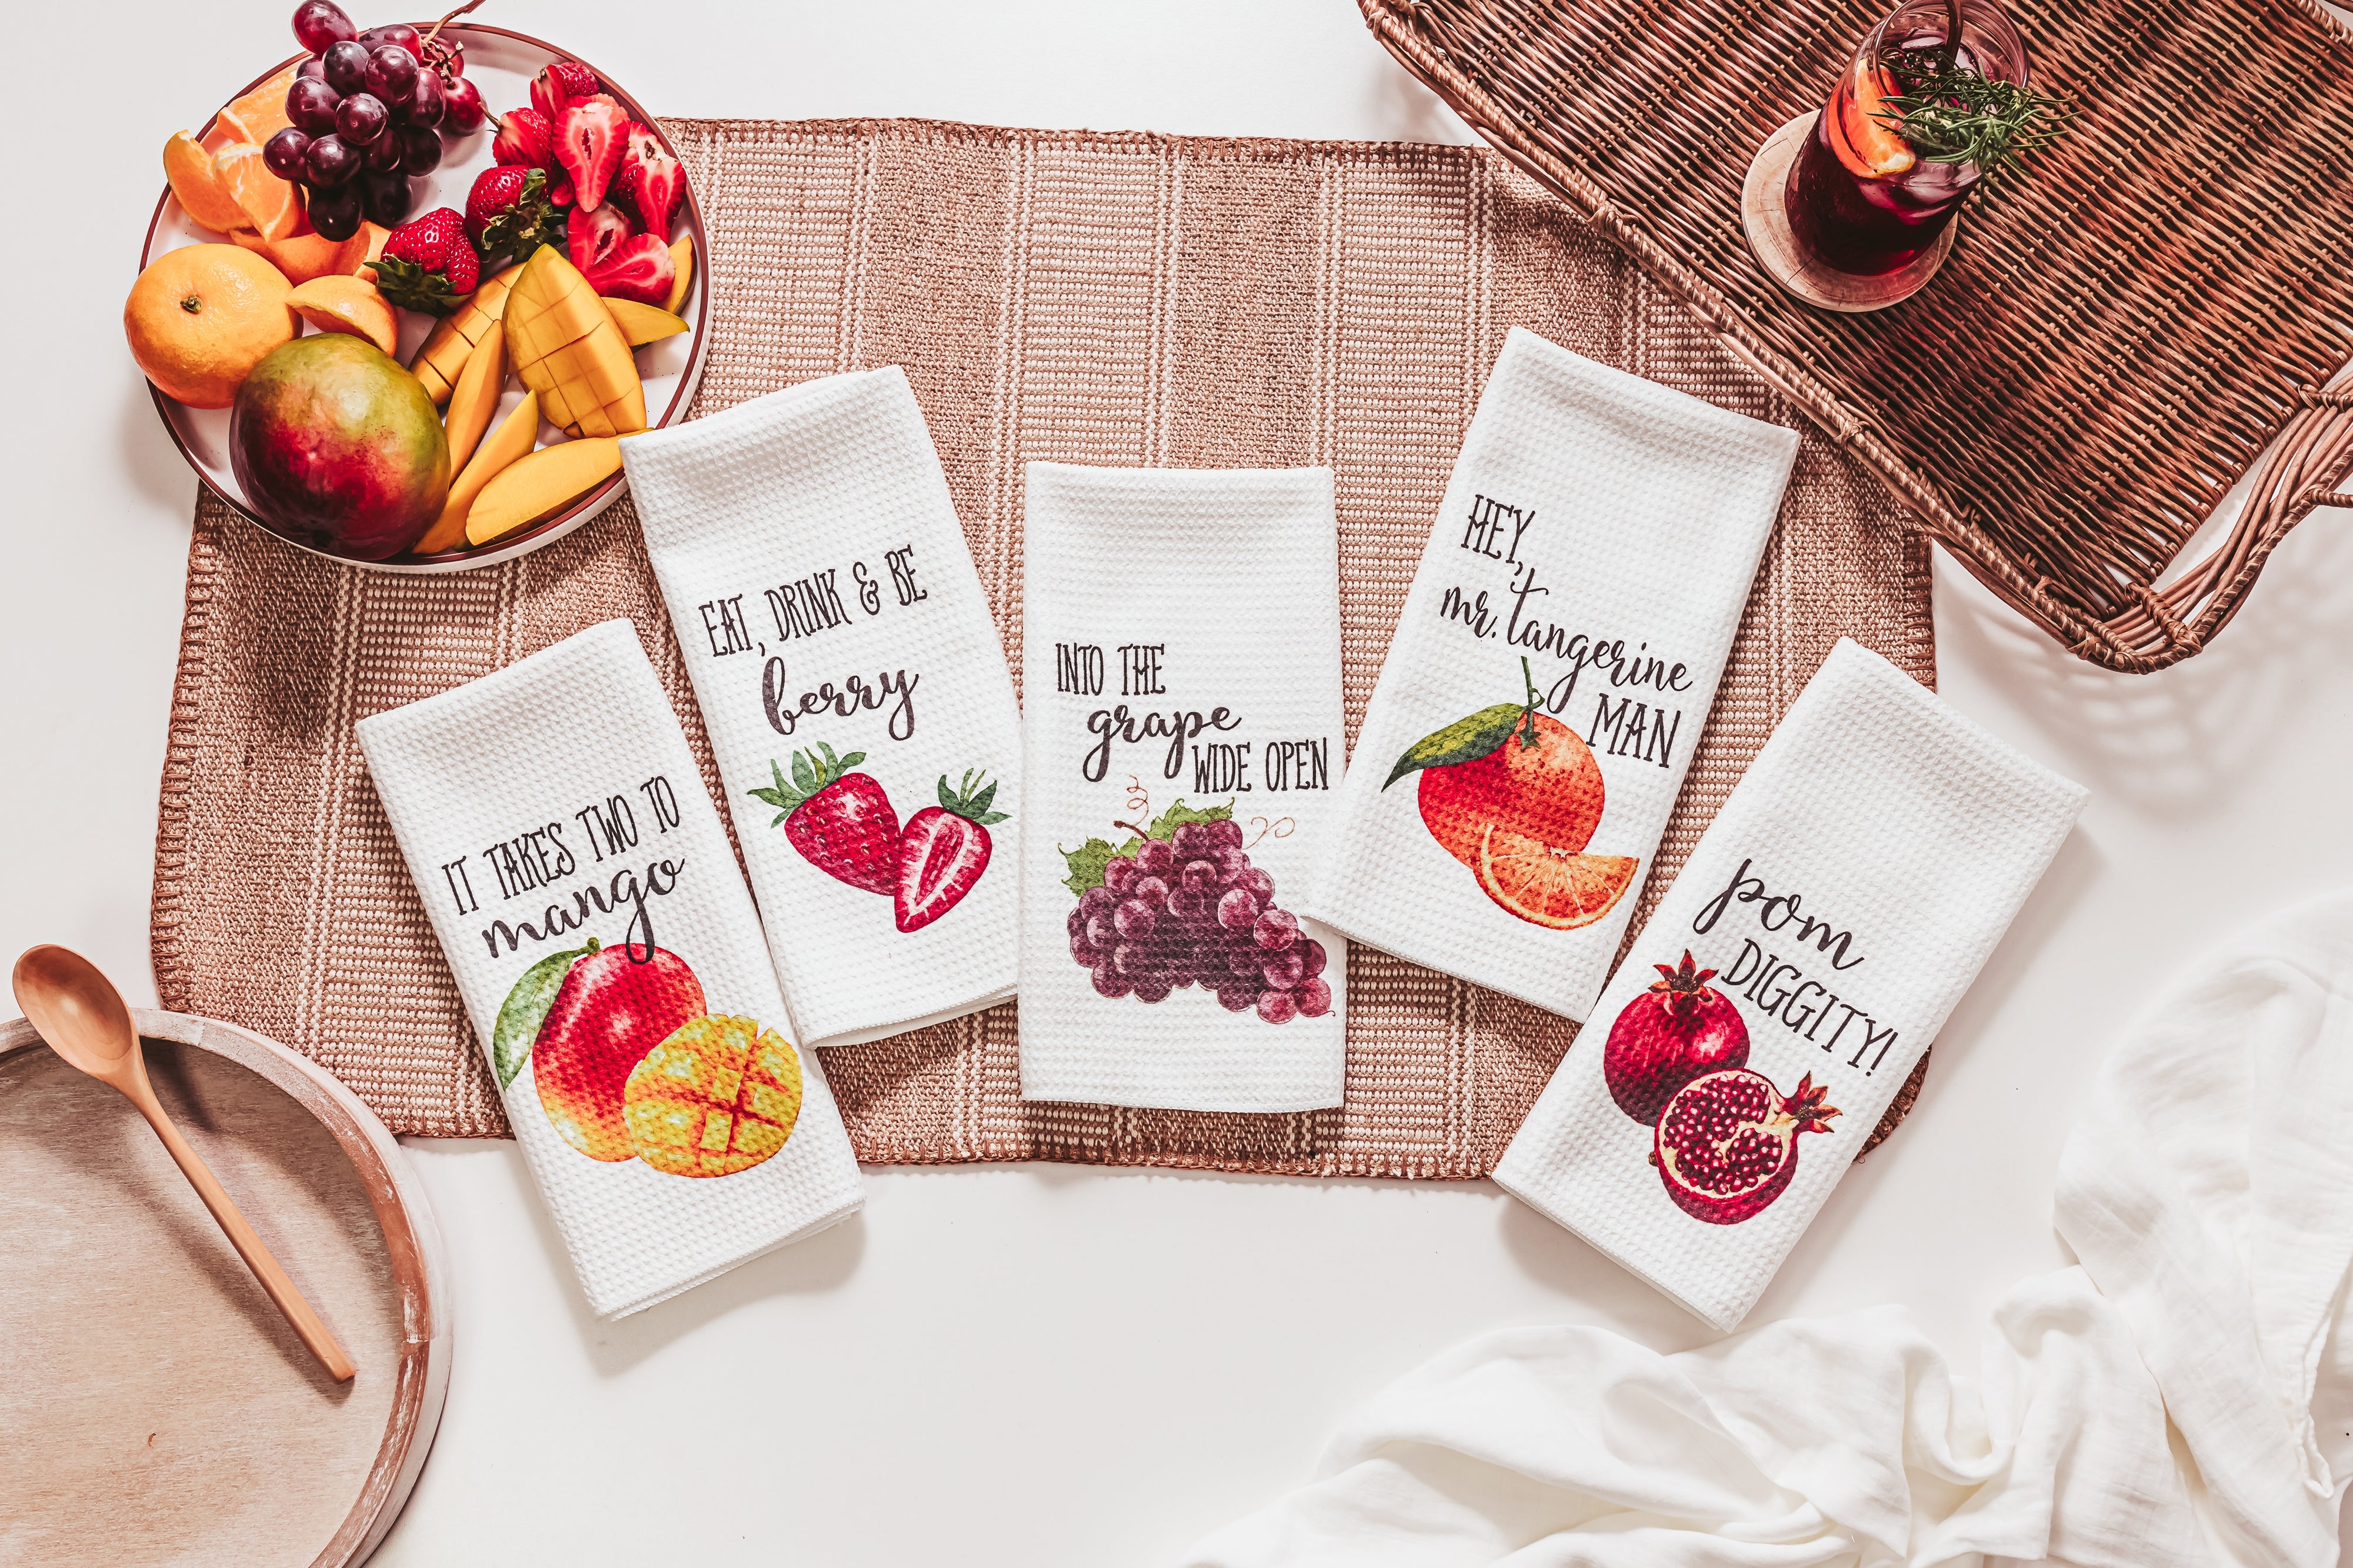 72 Wholesale Colorful Fruit Design Hndy Kitchen Towel With Hanging